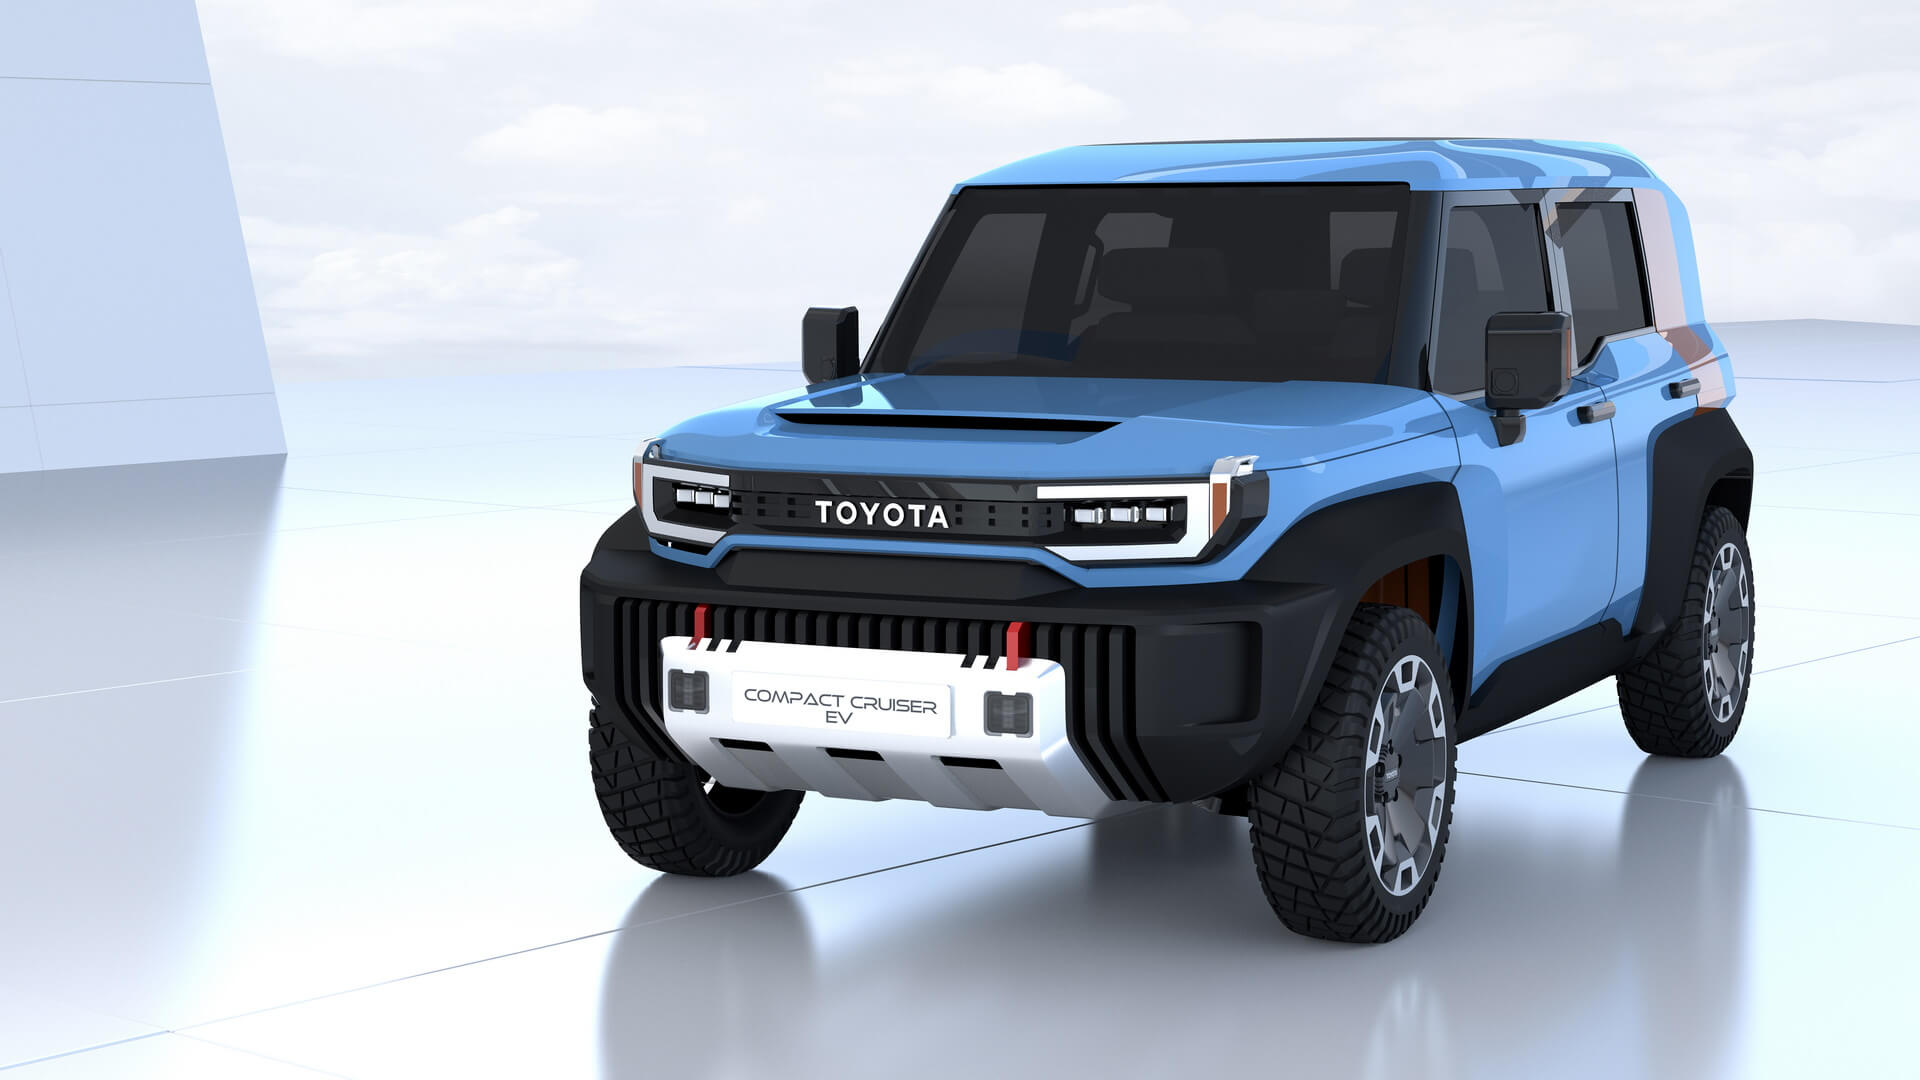 Toyota Compact Cruiser EV: an electric car that could be the successor to the Toyota FJ Cruiser